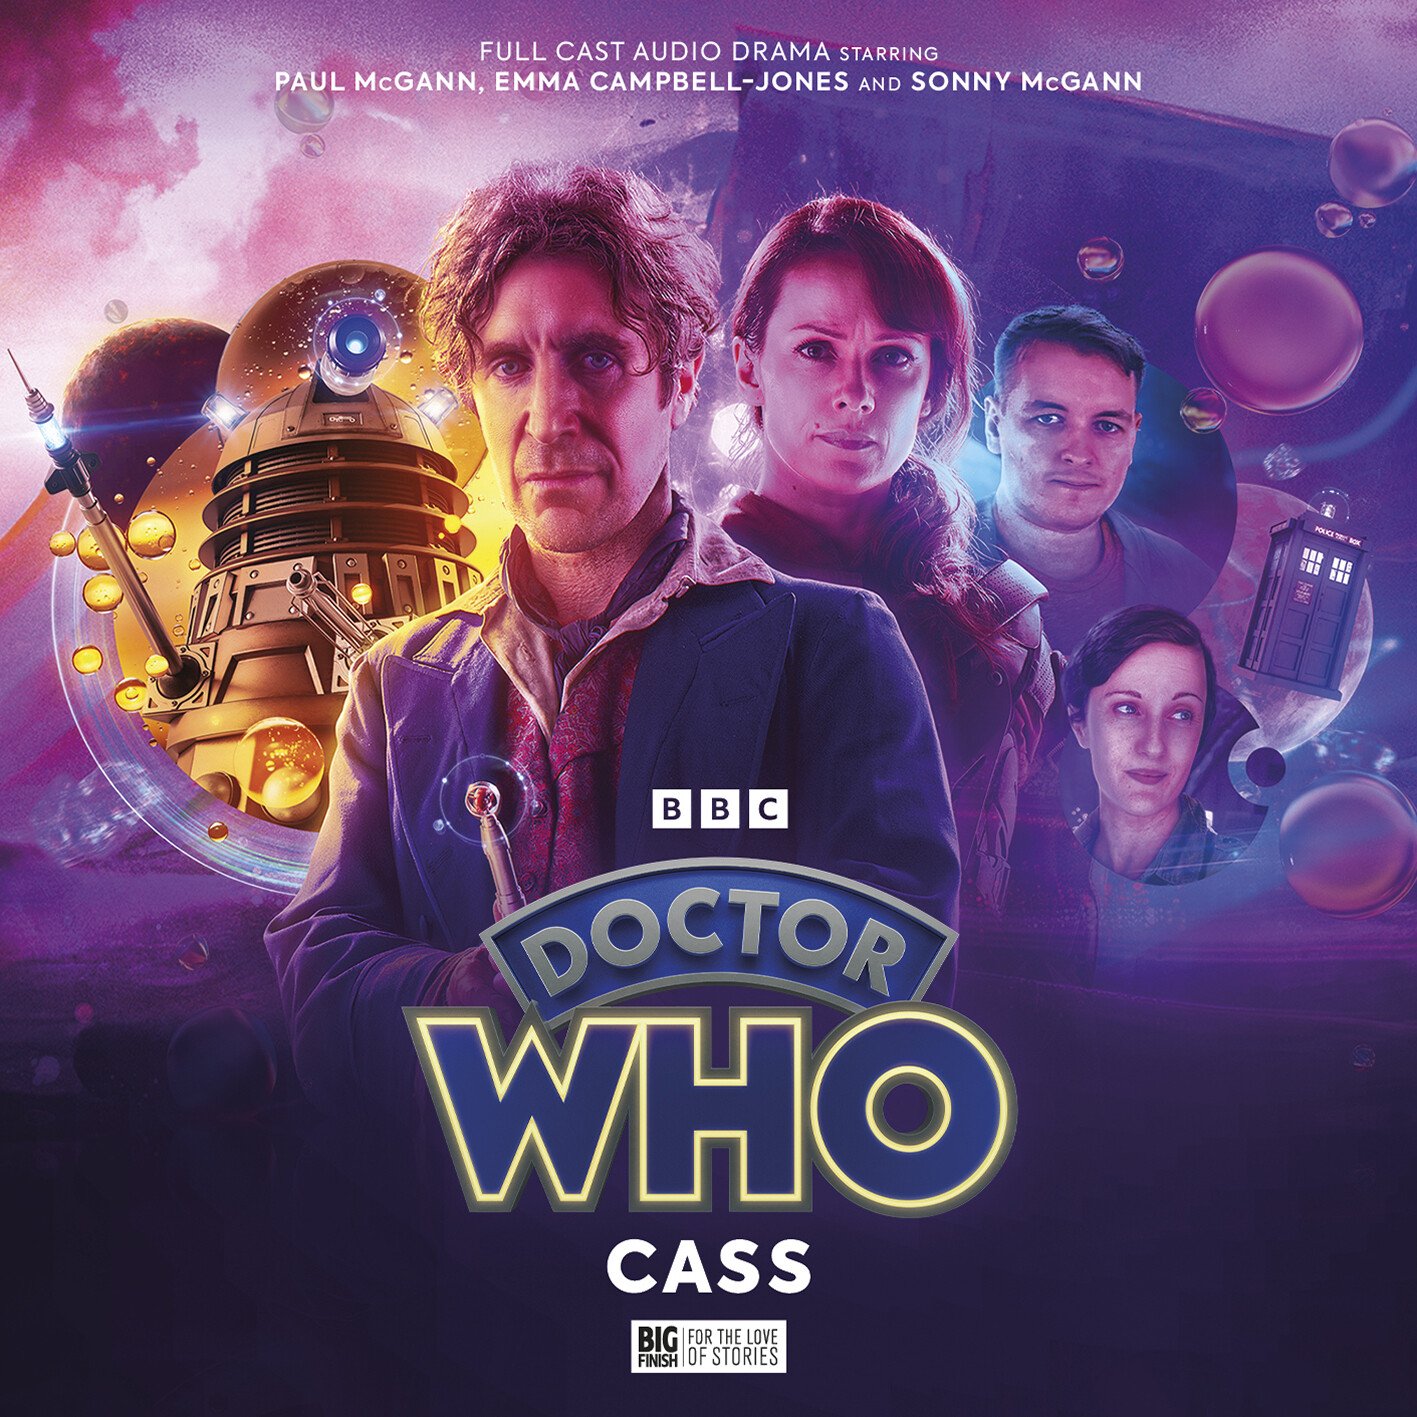 Out Now: The Eighth Doctor Returns to the Time War With New Companion… Cass?!